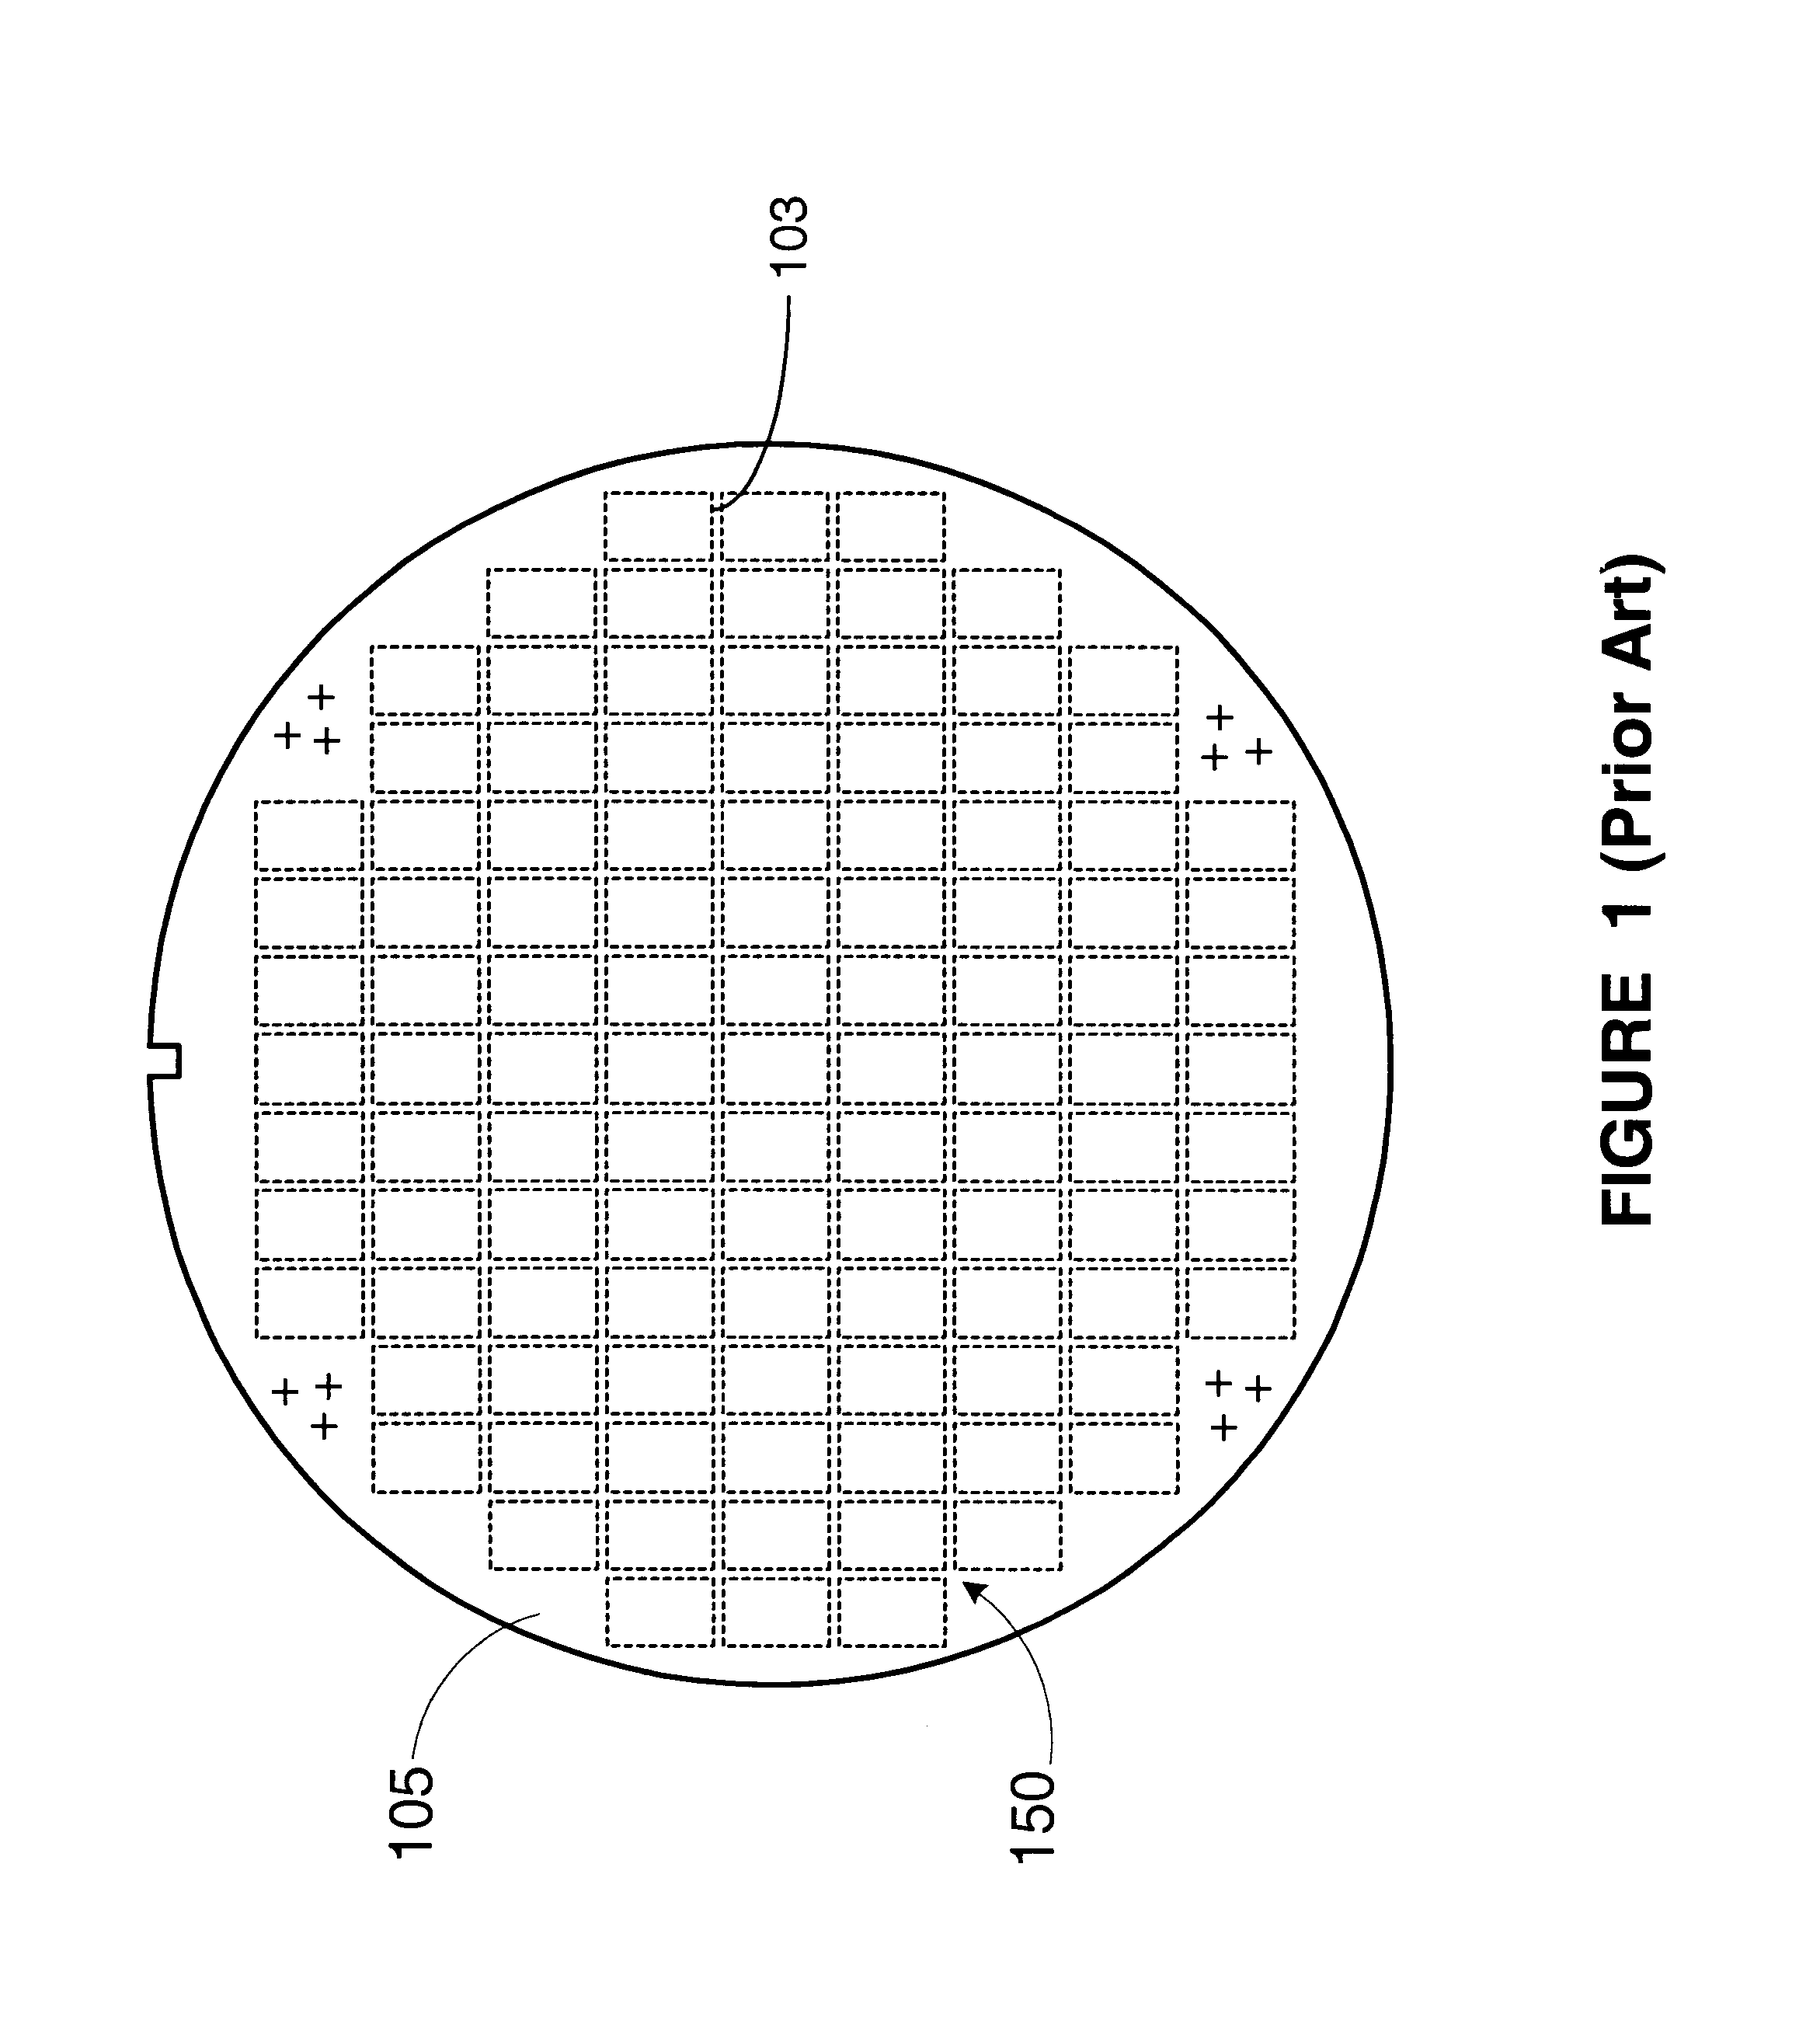 Dynamic process state adjustment of a processing tool to reduce non-uniformity